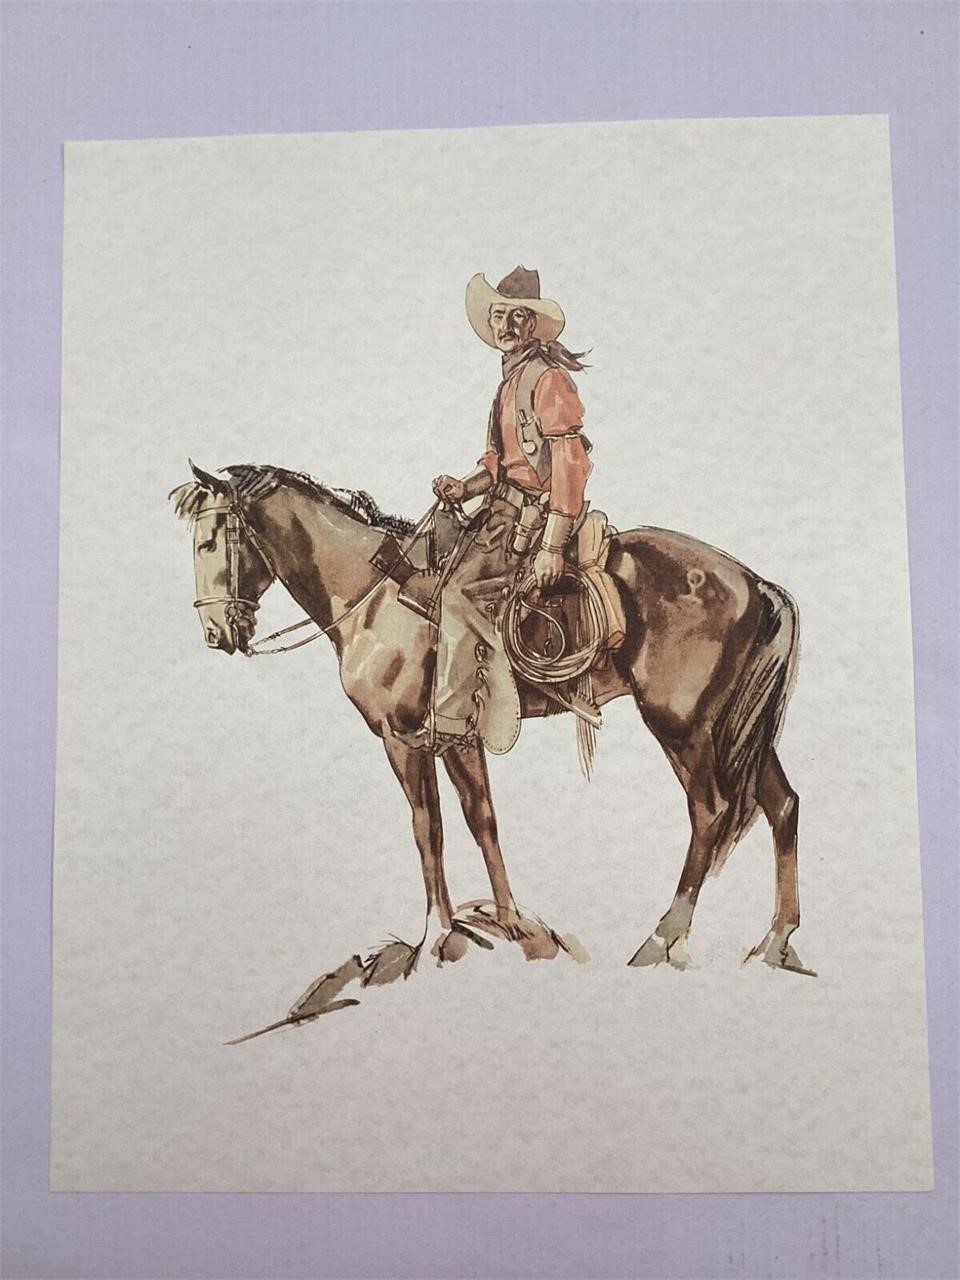 Western Cowboy Water Color Pint 16X20